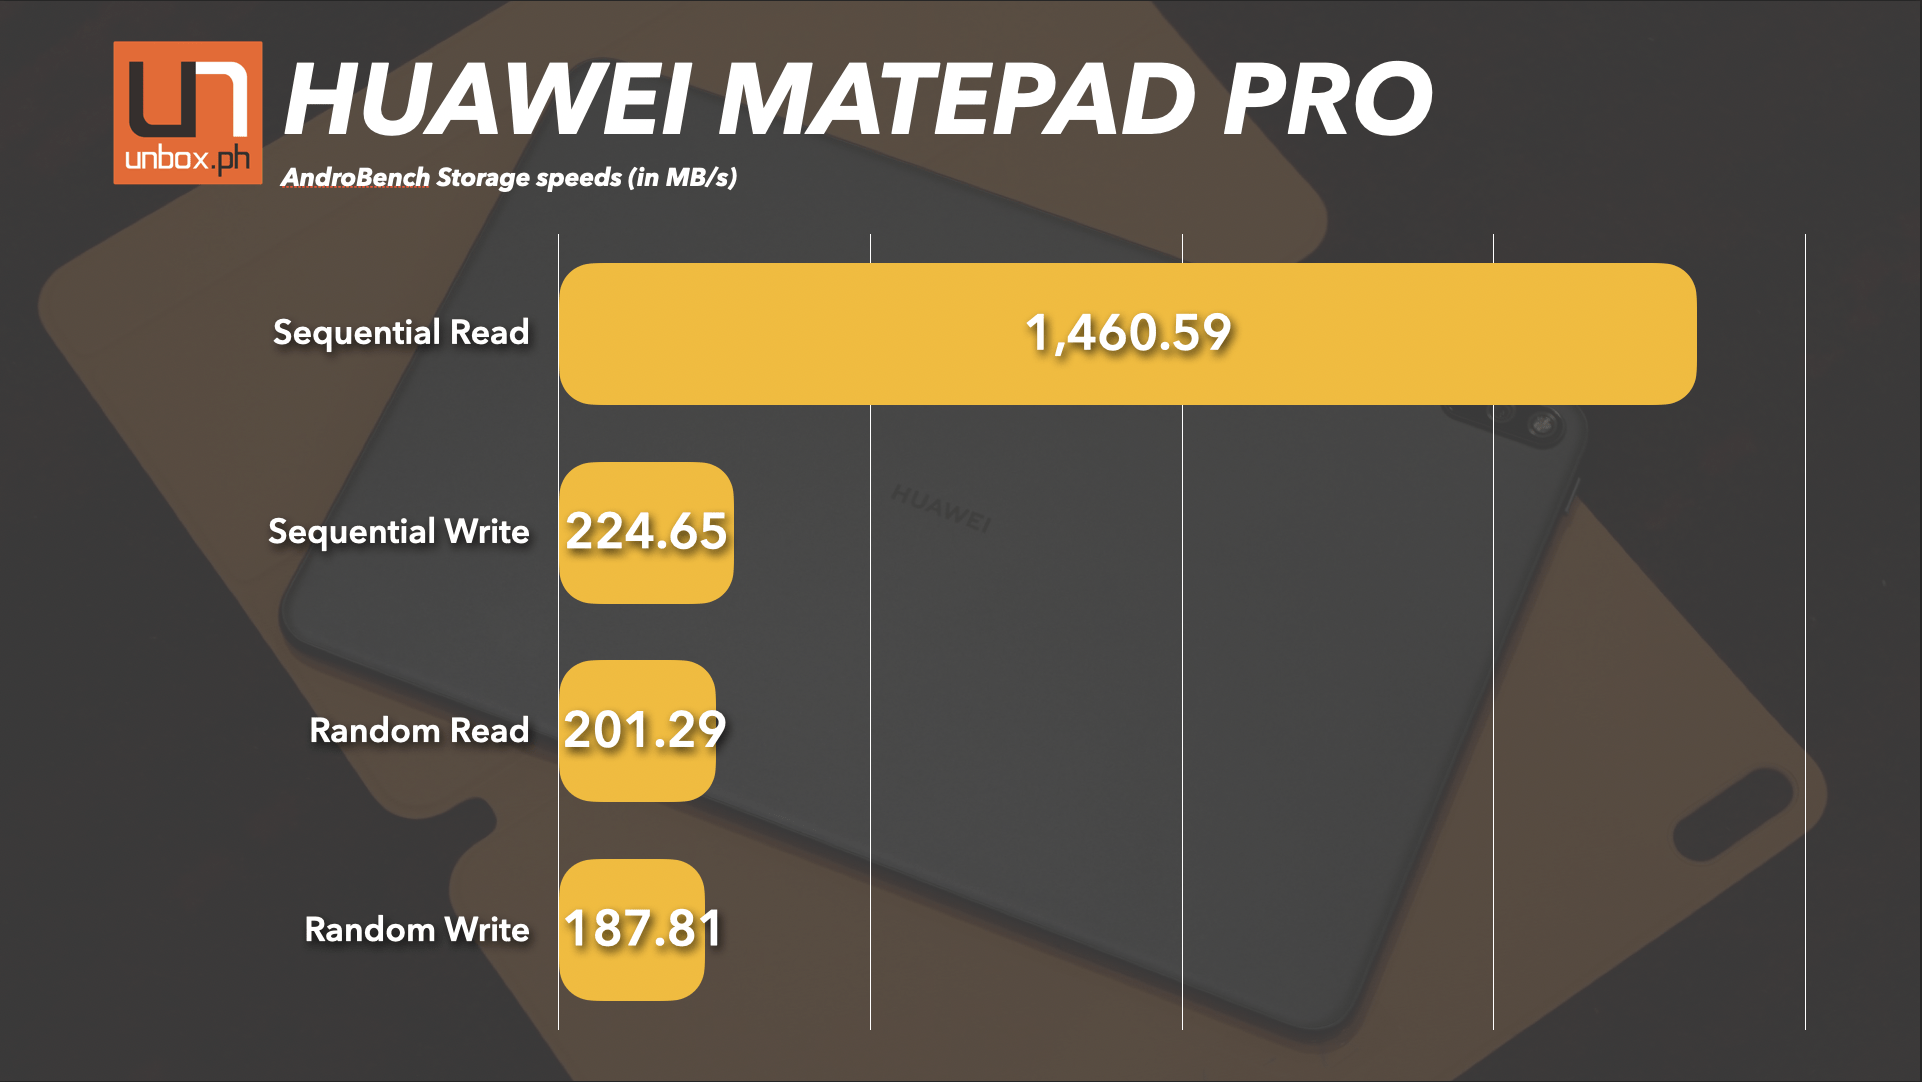 huawei matepad pro androbench storage speeds results